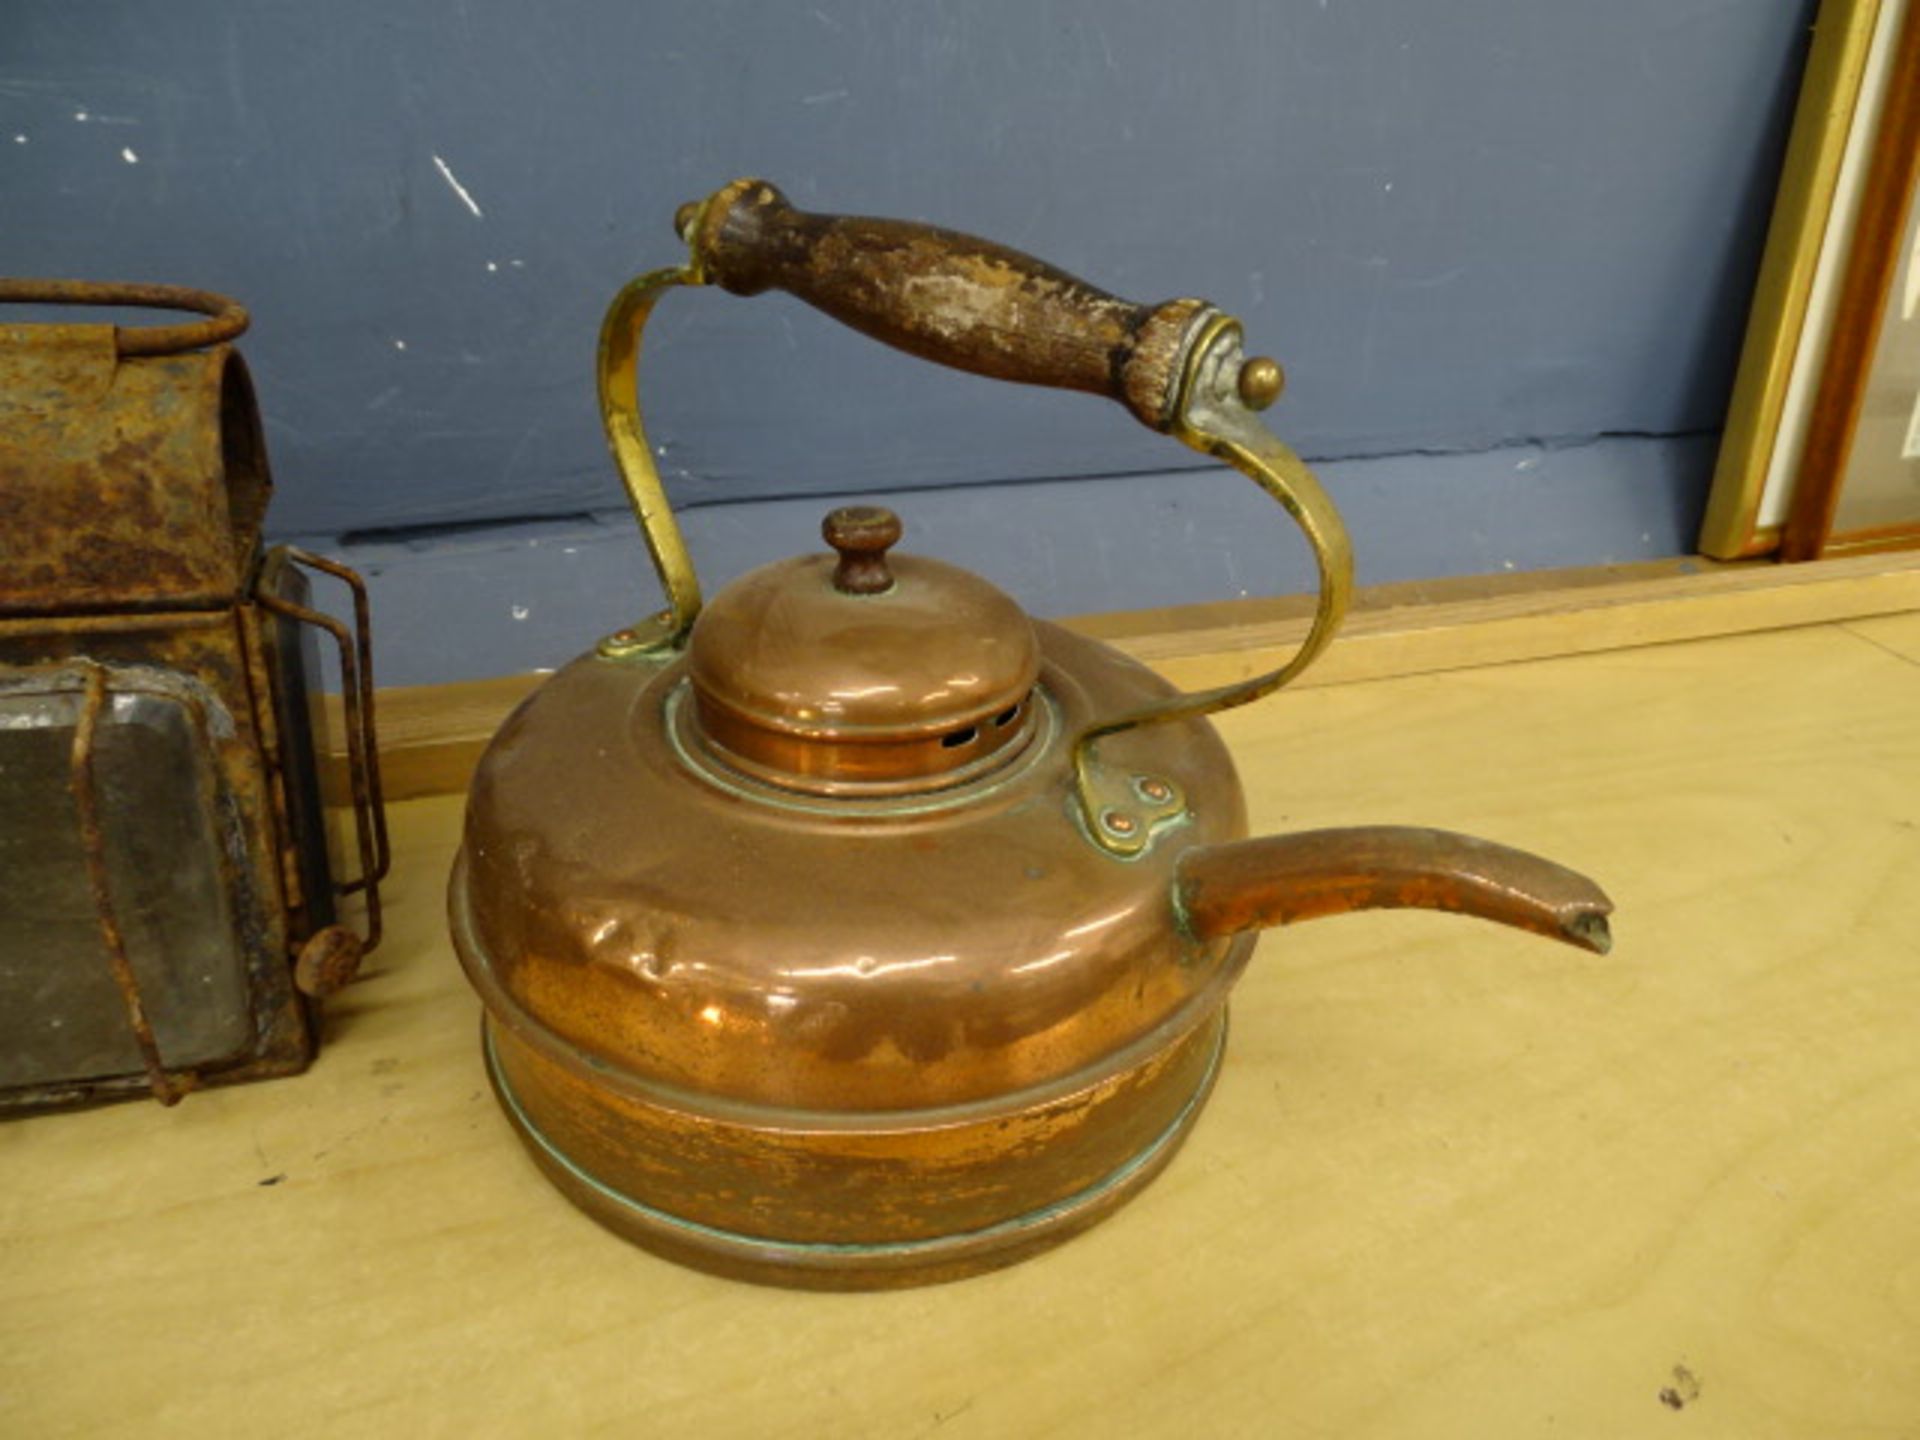 2 Antique signal lamps, bicycle lamp and copper kettle - Image 3 of 6